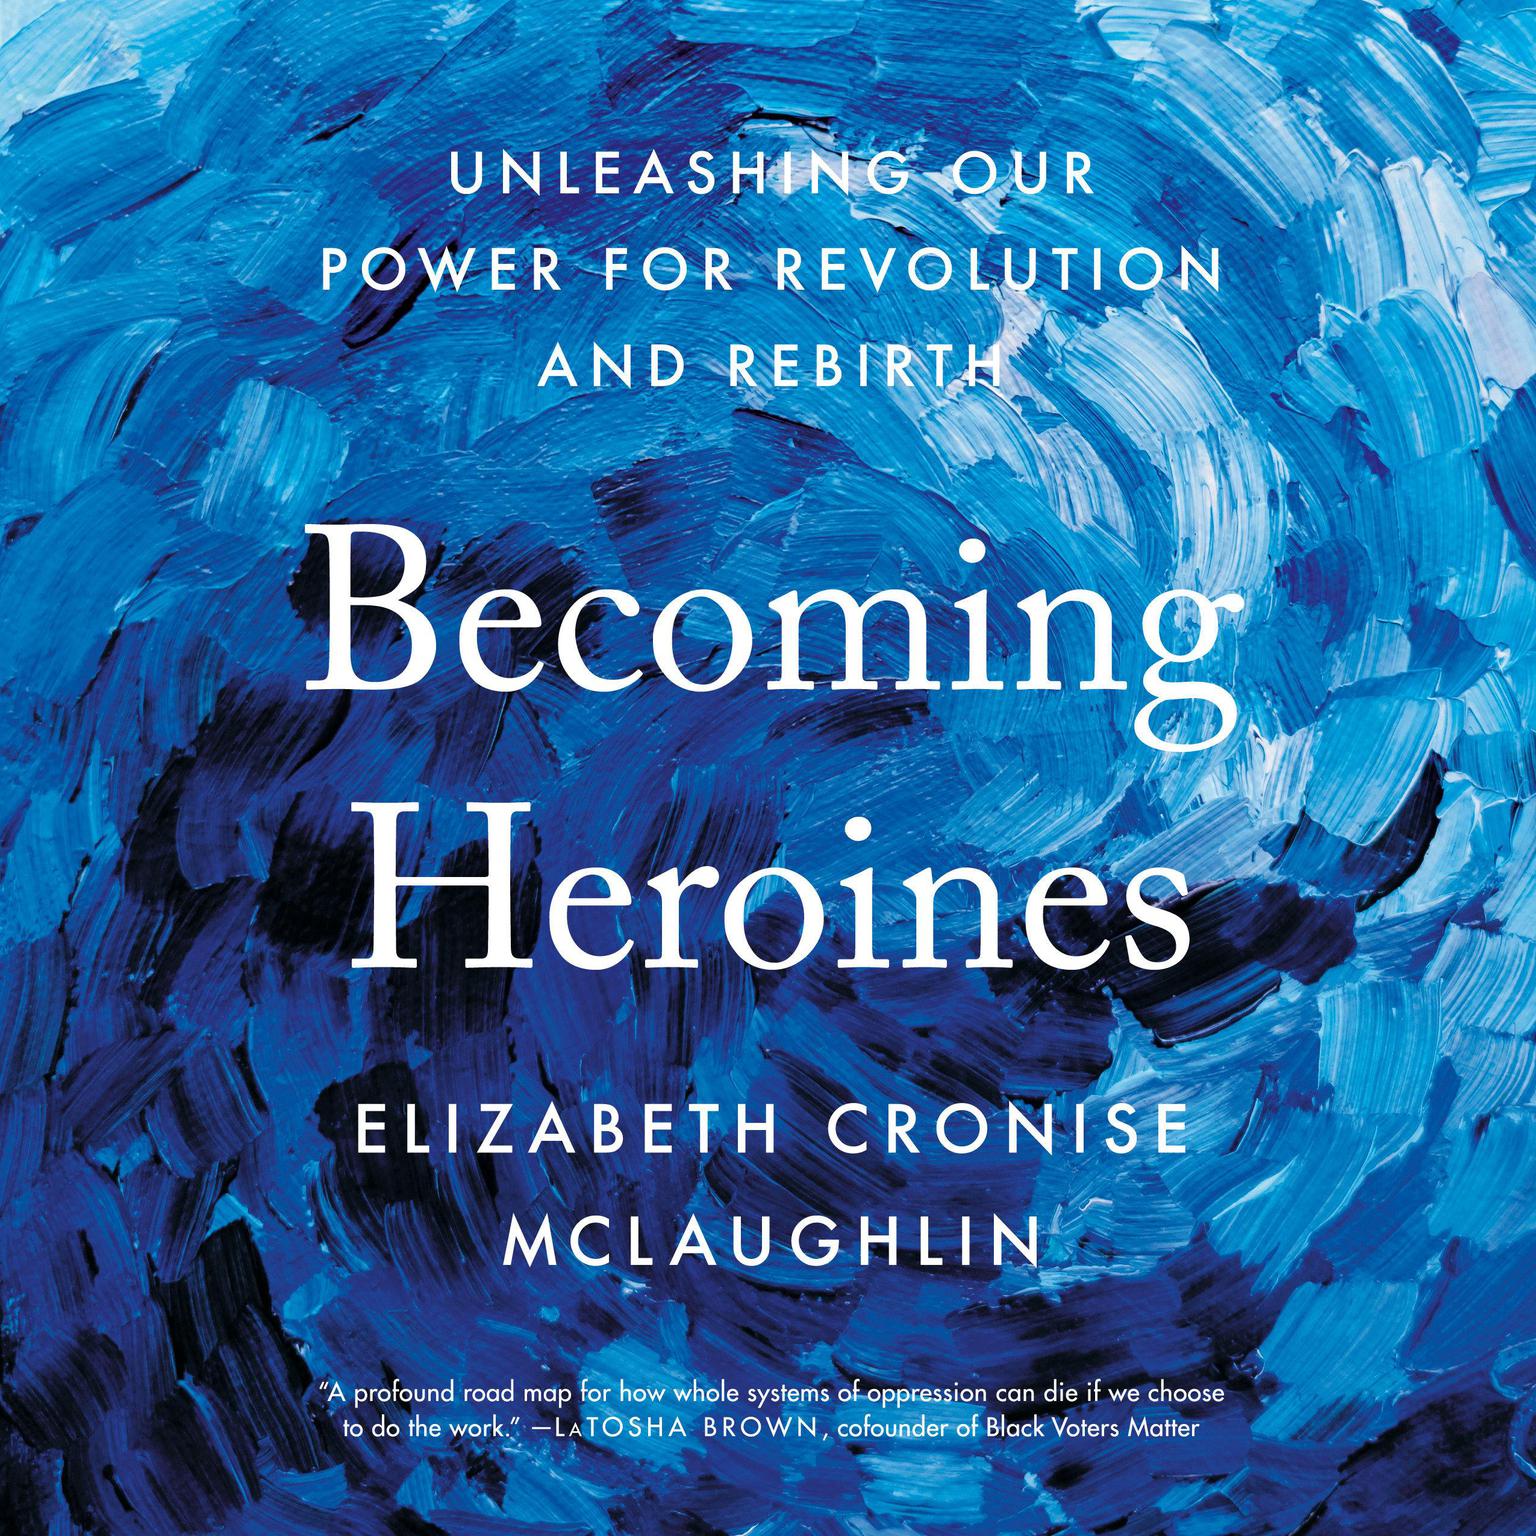 Becoming Heroines: Unleashing Our Power for Revolution and Rebirth Audiobook, by Elizabeth Cronise McLaughlin